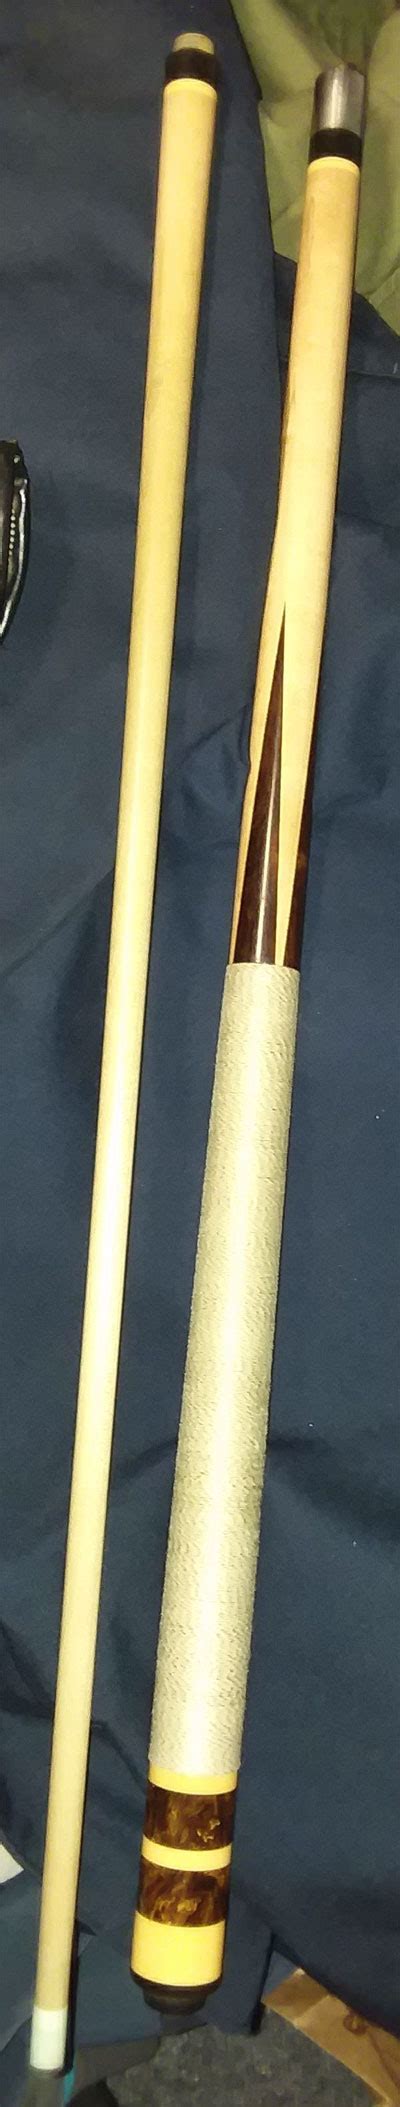 Identify Pool Cue With Short Joint Pin